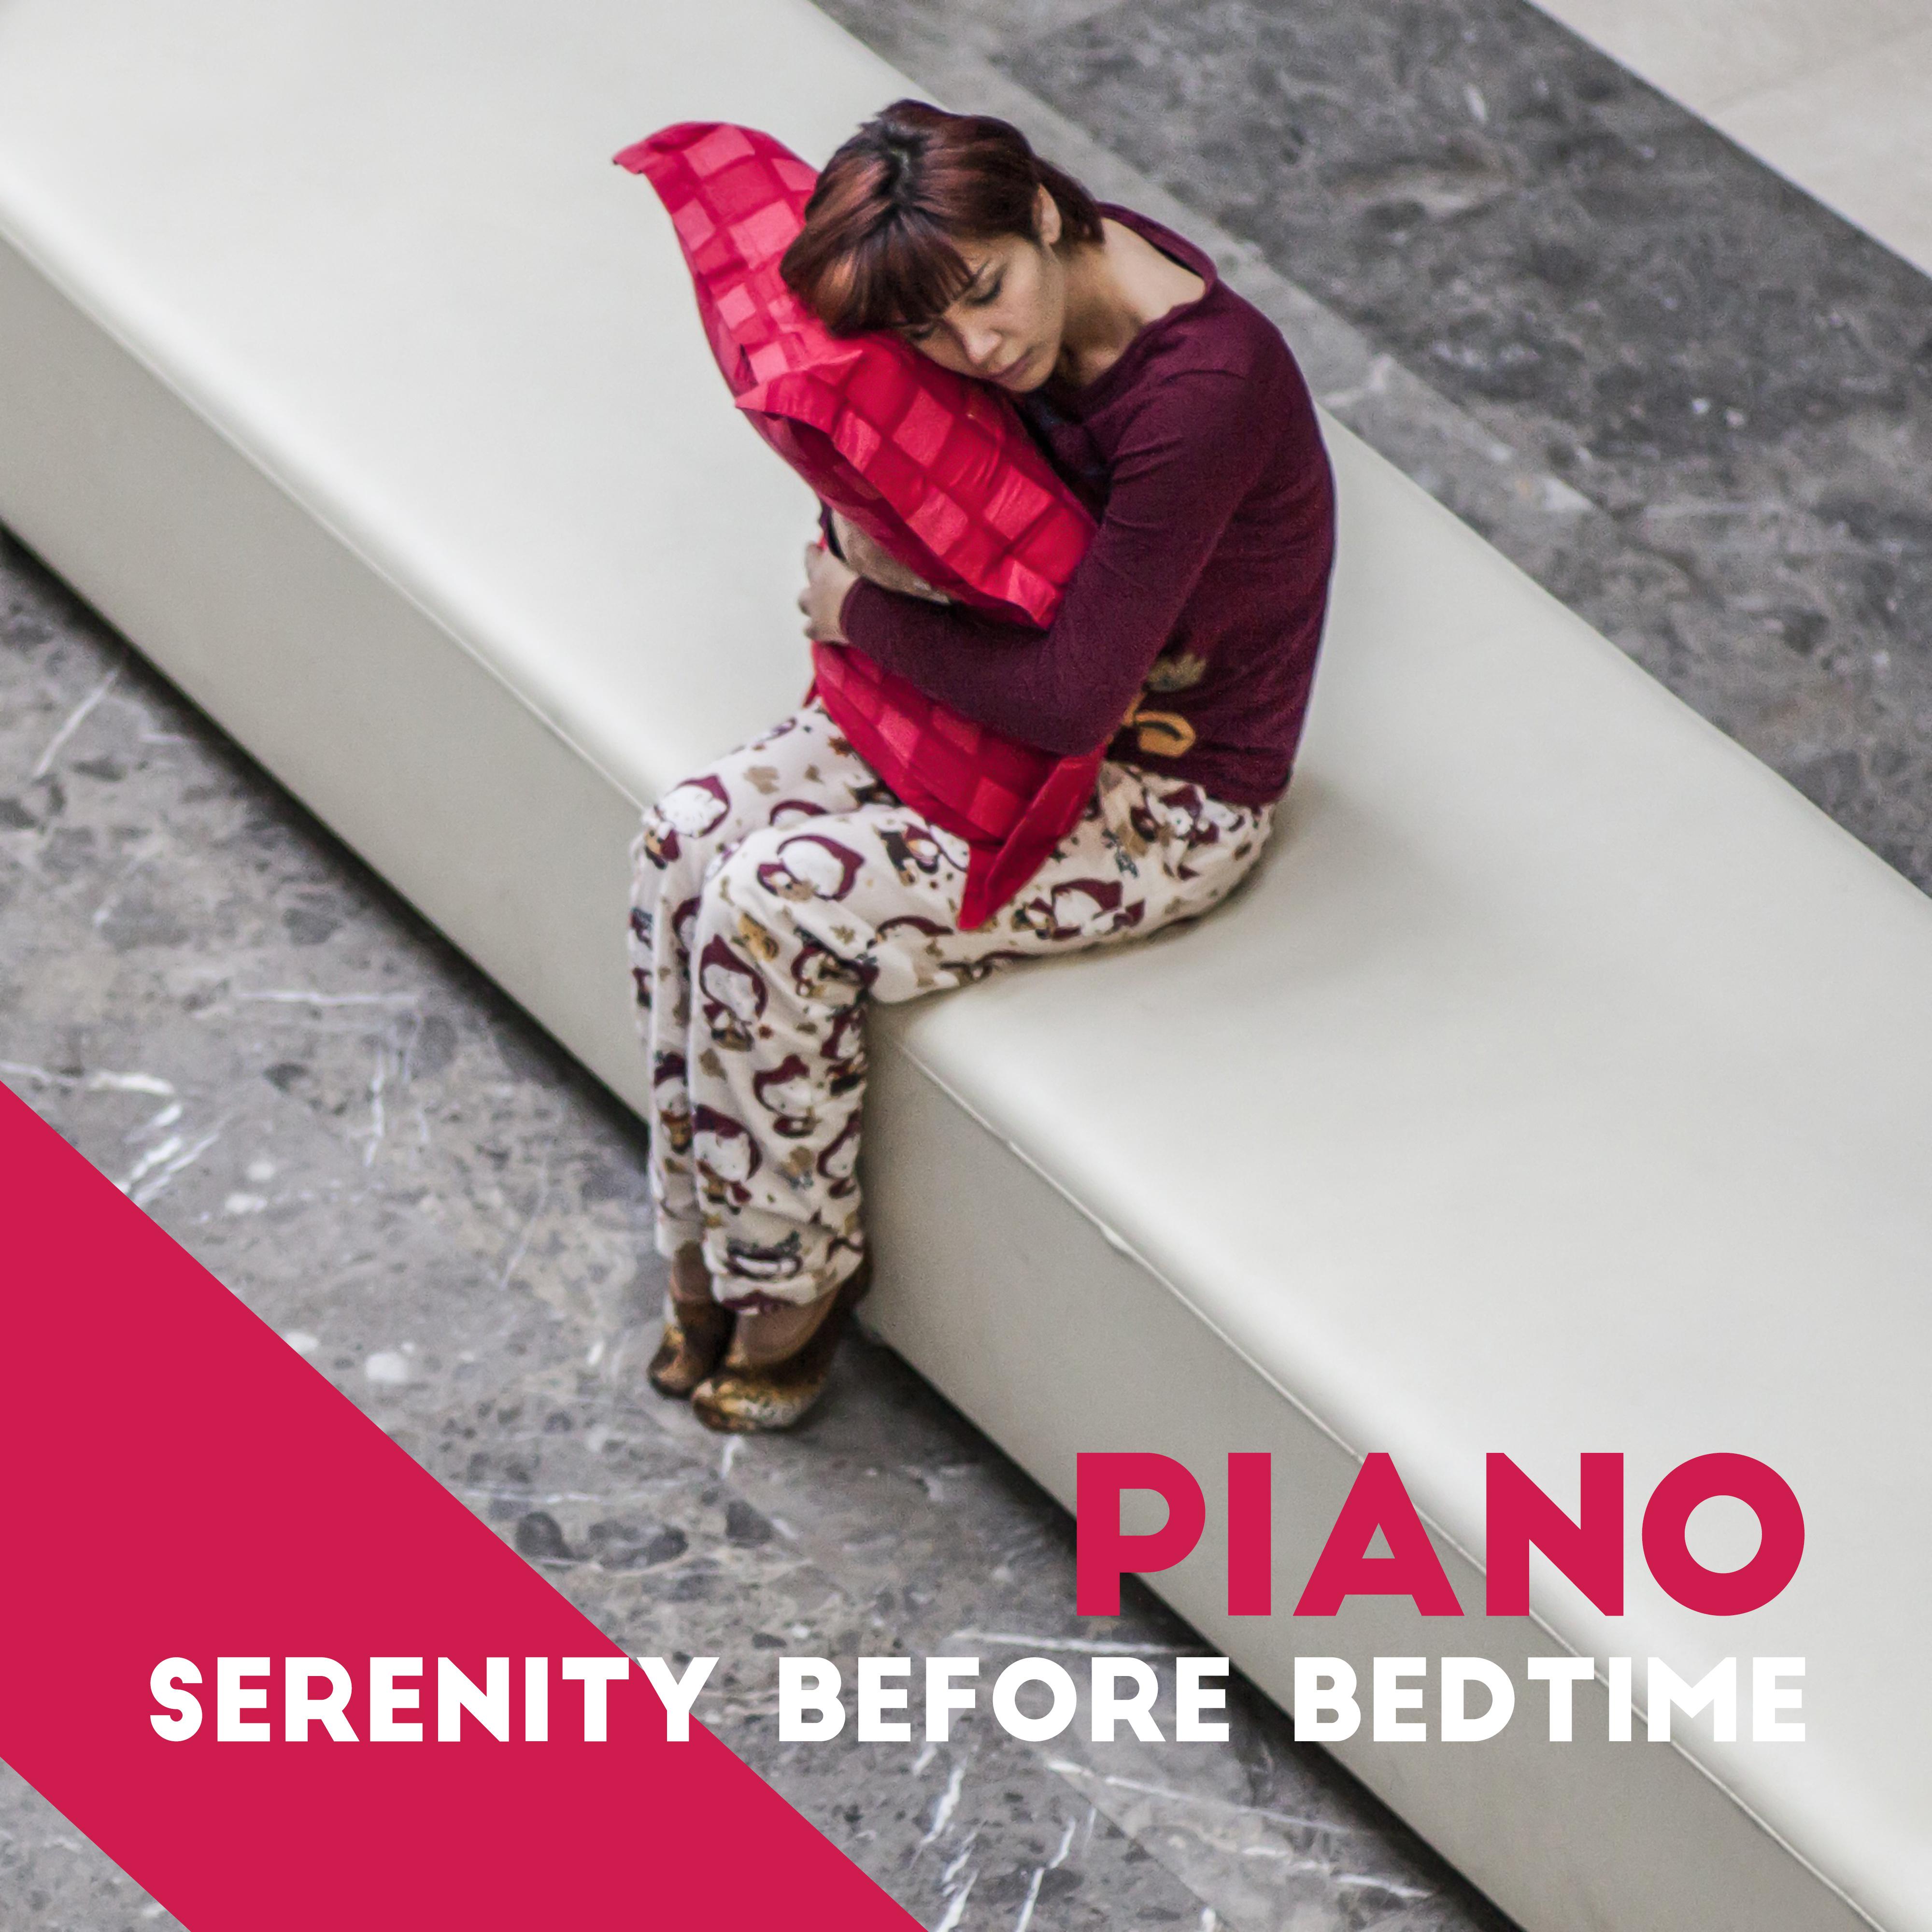 Piano Serenity Before Bedtime: 15 Instrumental Piano Jazz Soothing Songs for Total Relax After Tough Day, Calm Down, De-Stress & Sleep Very Well